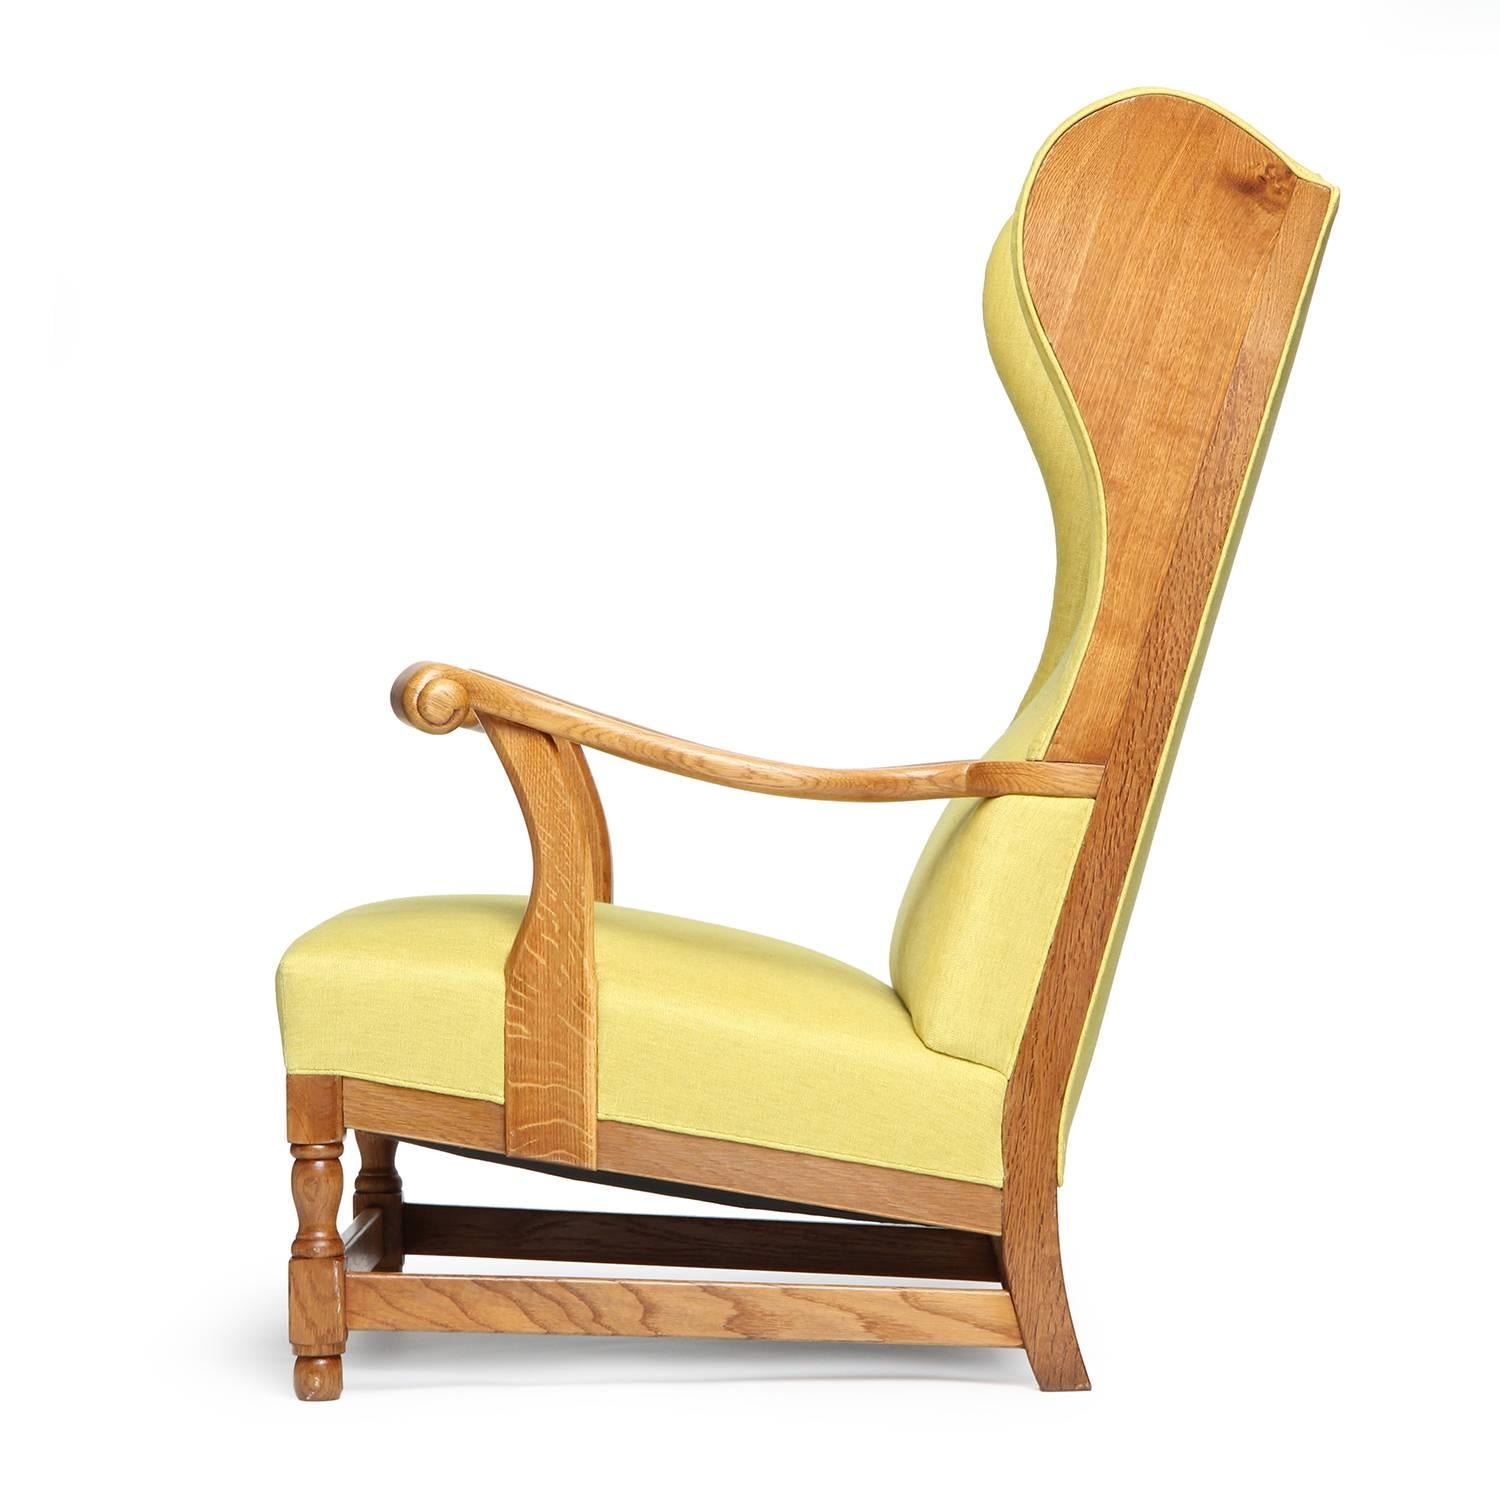 A highly expressive and well scaled upholstered wingback chair having sculpted knuckled arms and an exposed oak wood frame.